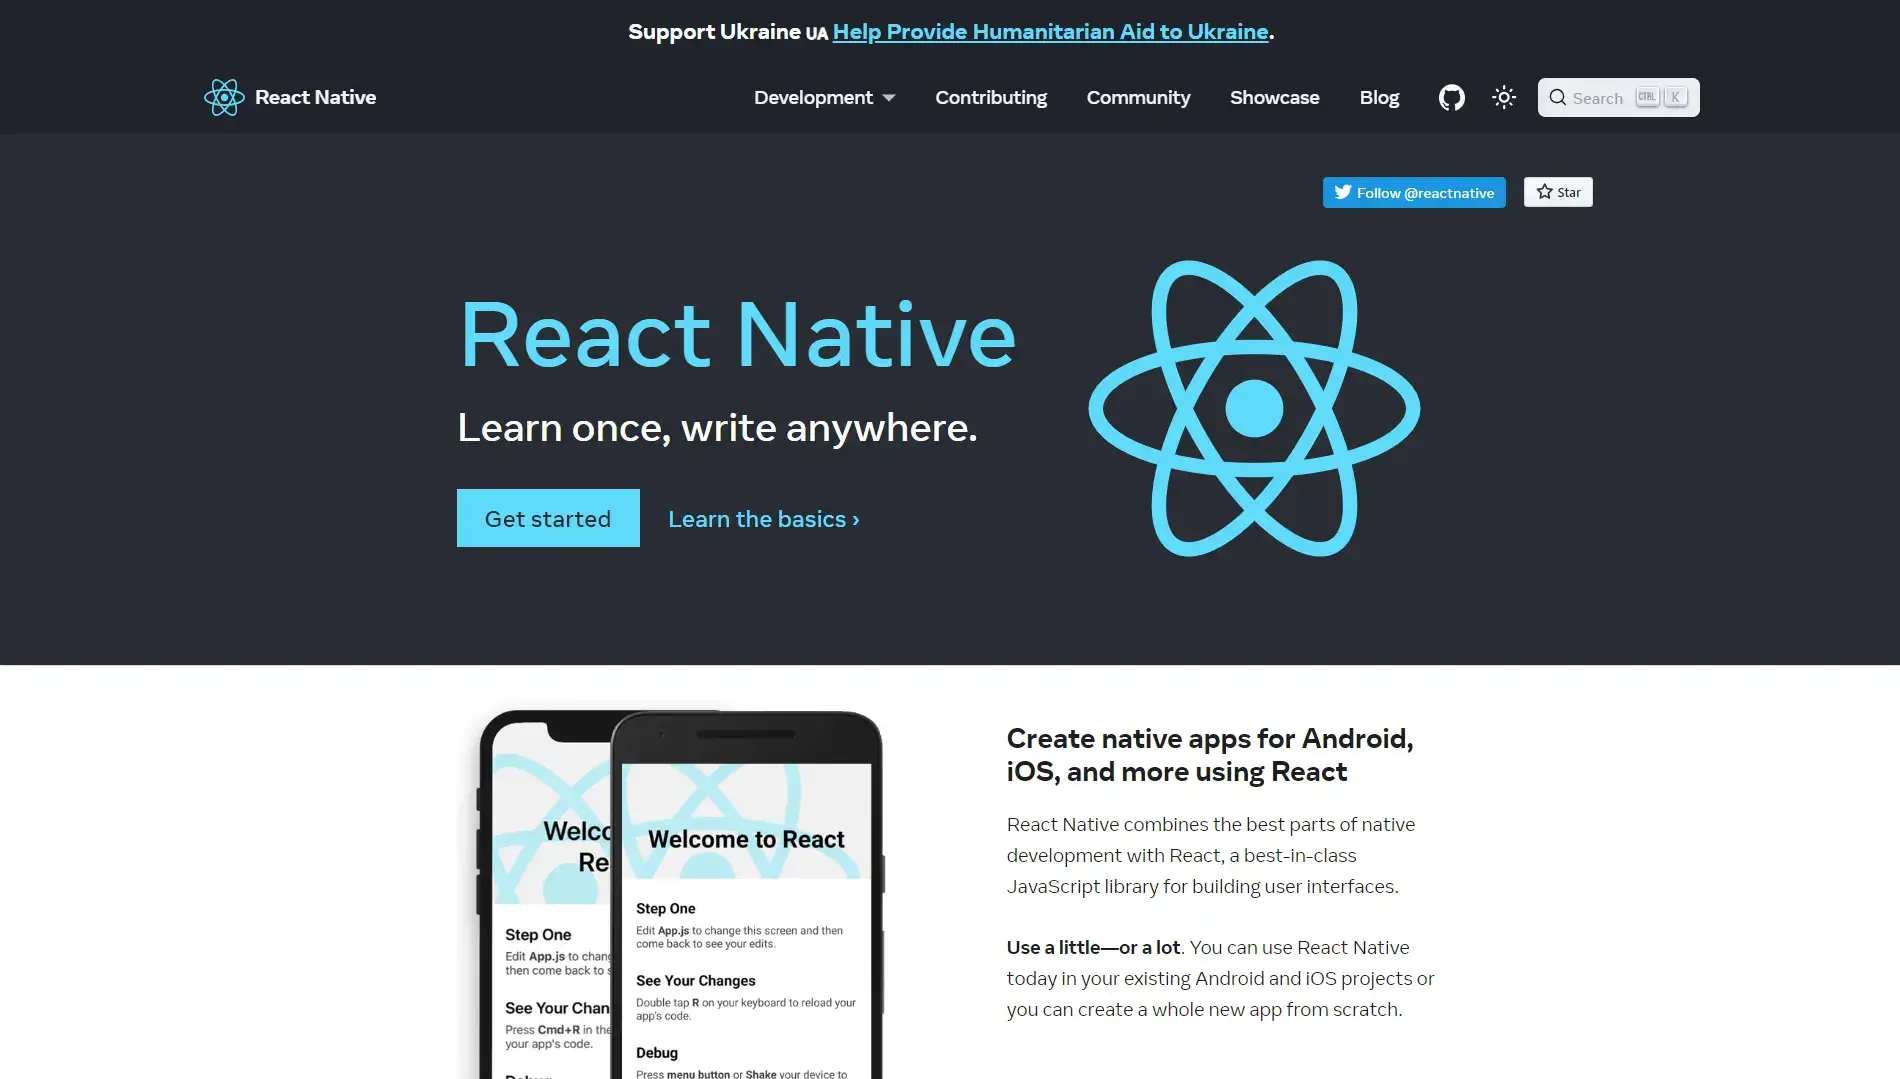 React Native website homepage mage.